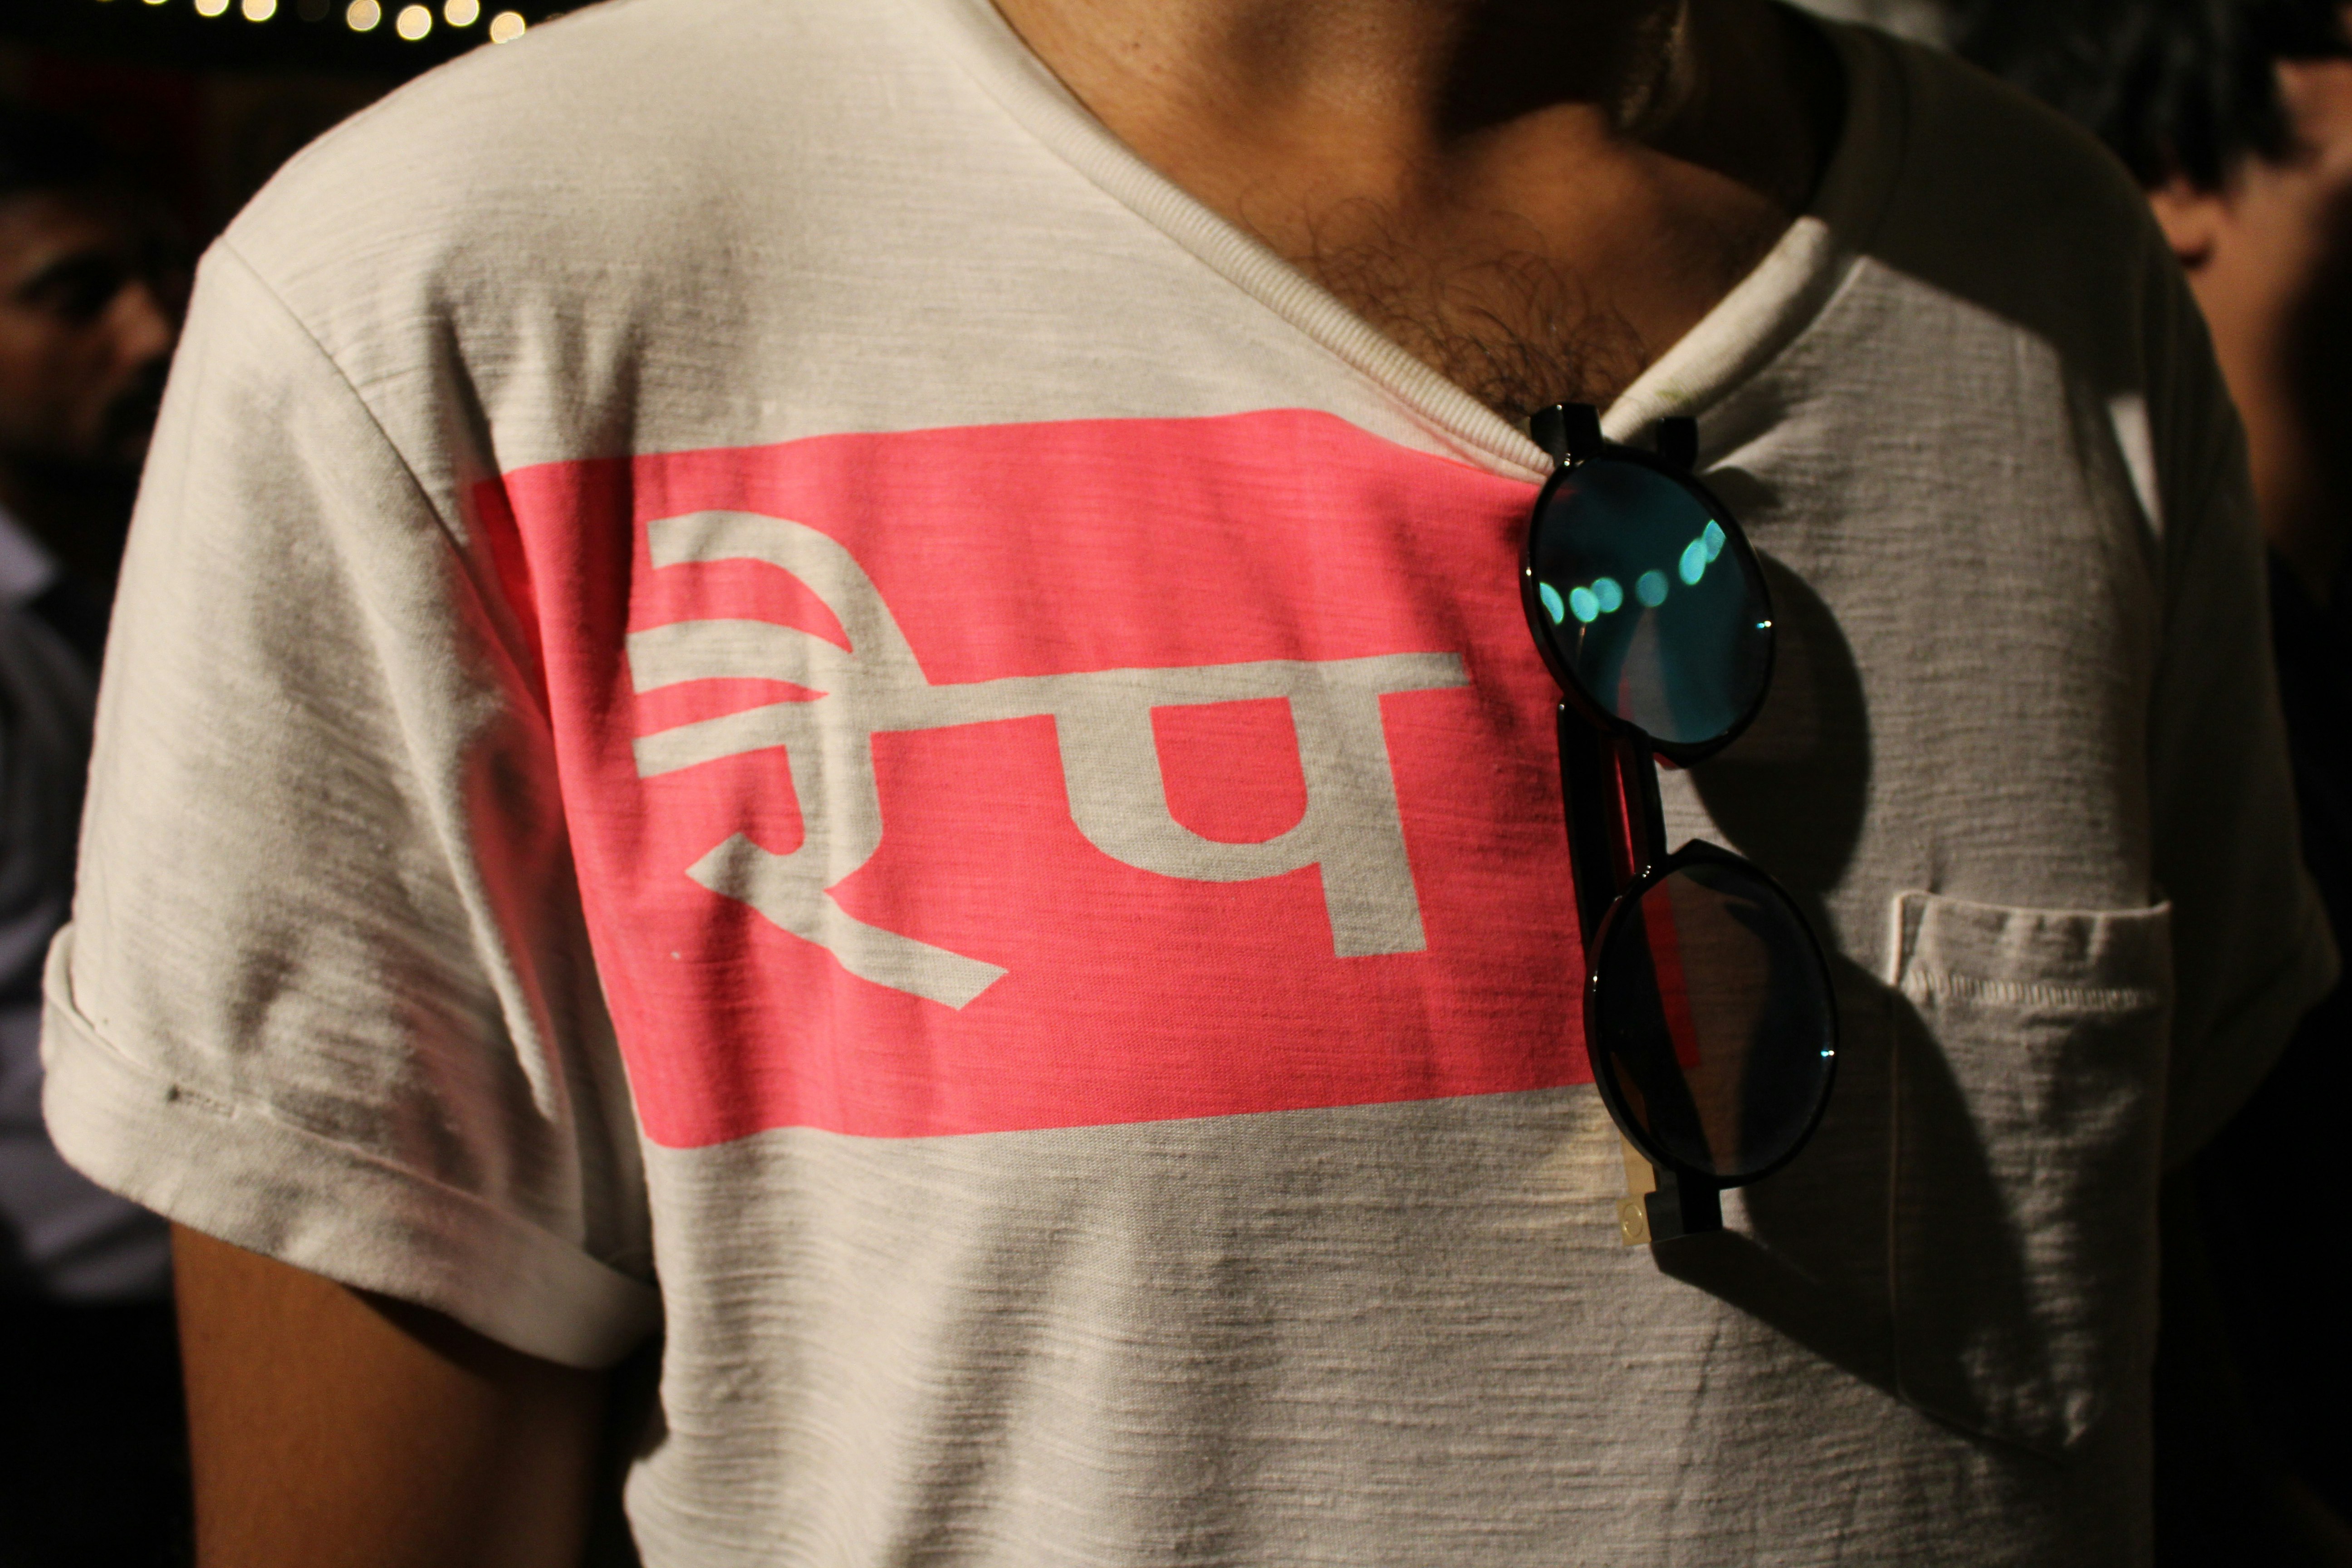 An anonymous figure wears a white t-shirt printed with Hindi characters in a bright pink square, with sunglasses resting on the collar of the t-shirt.